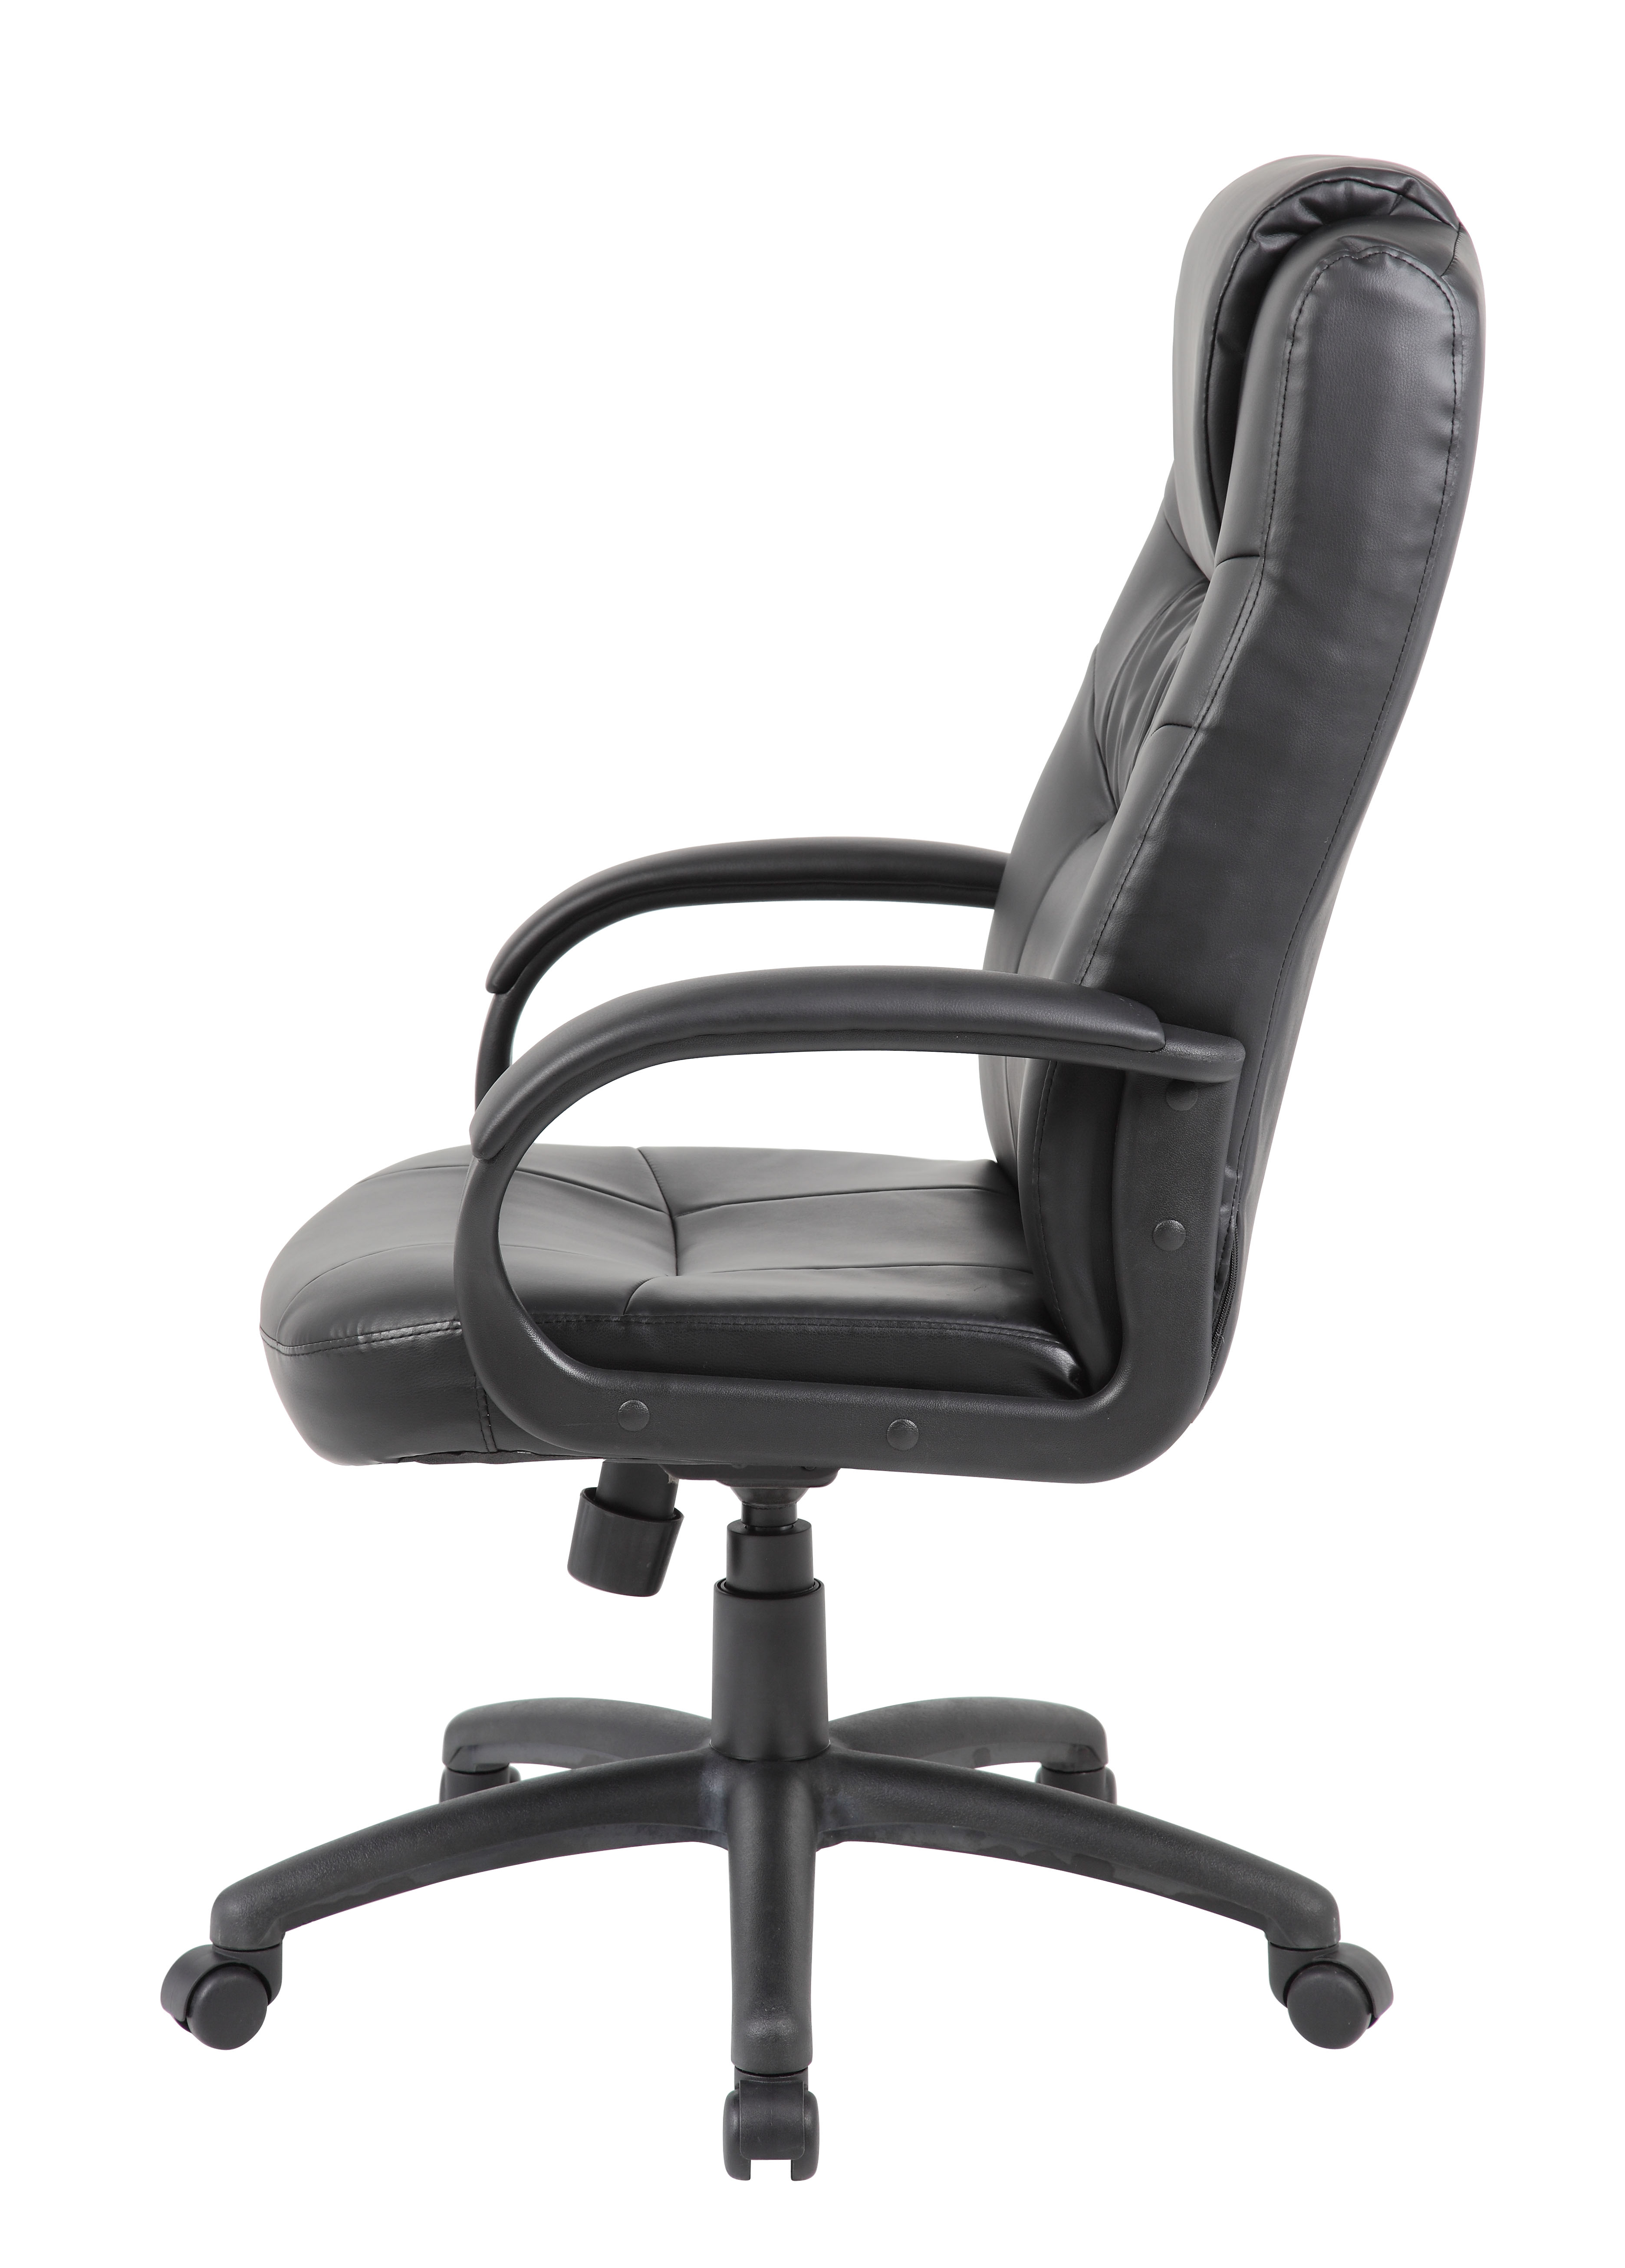 Boss Office Products Executive High Back LeatherPlus Chair in Black 